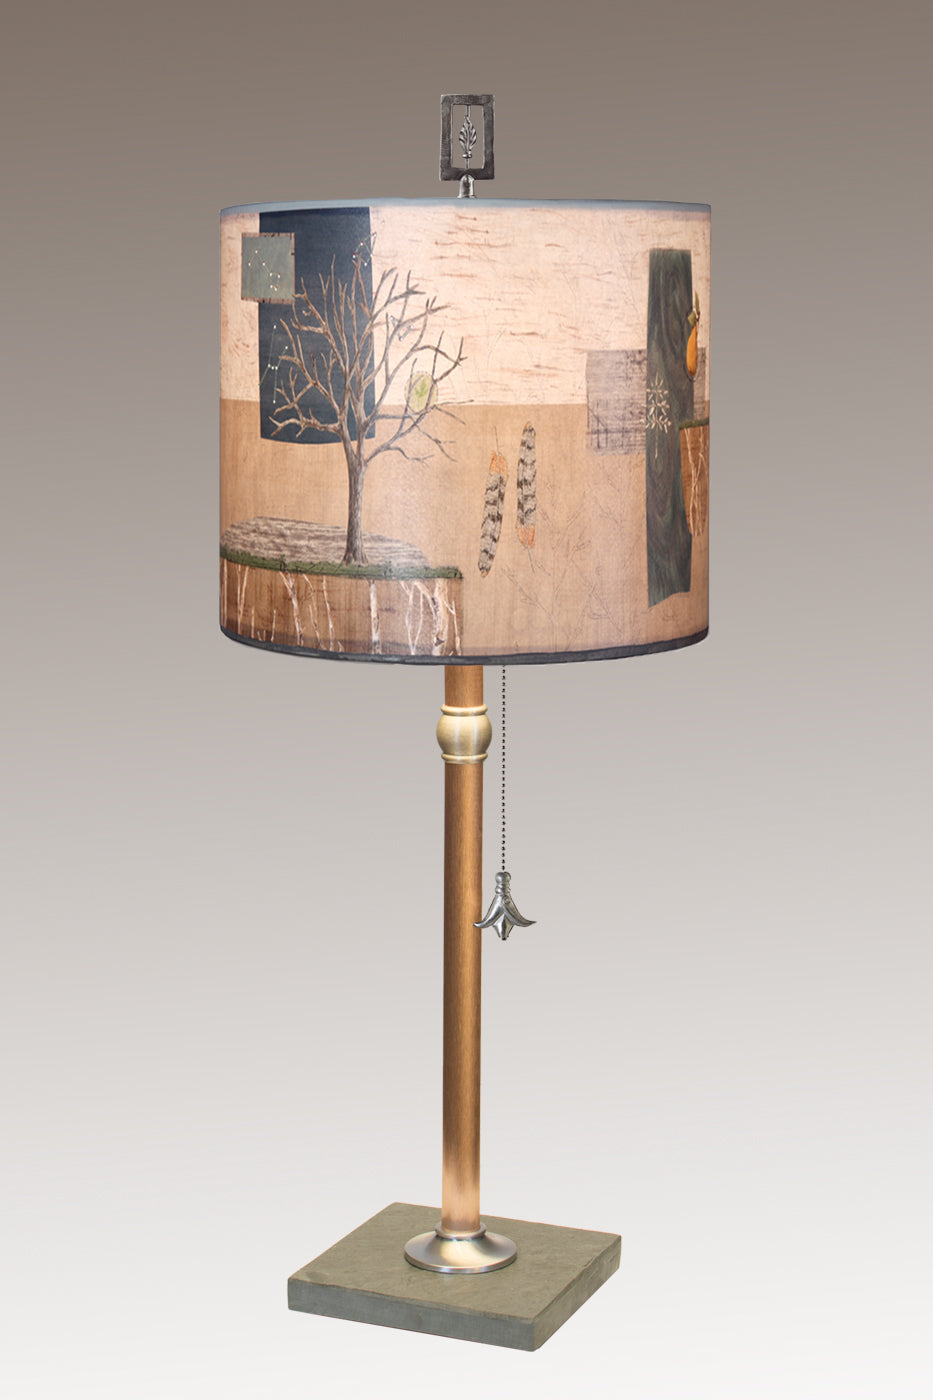 Janna Ugone &amp; Co Table Lamps Copper Table Lamp with Medium Drum Shade in Wander in Drift